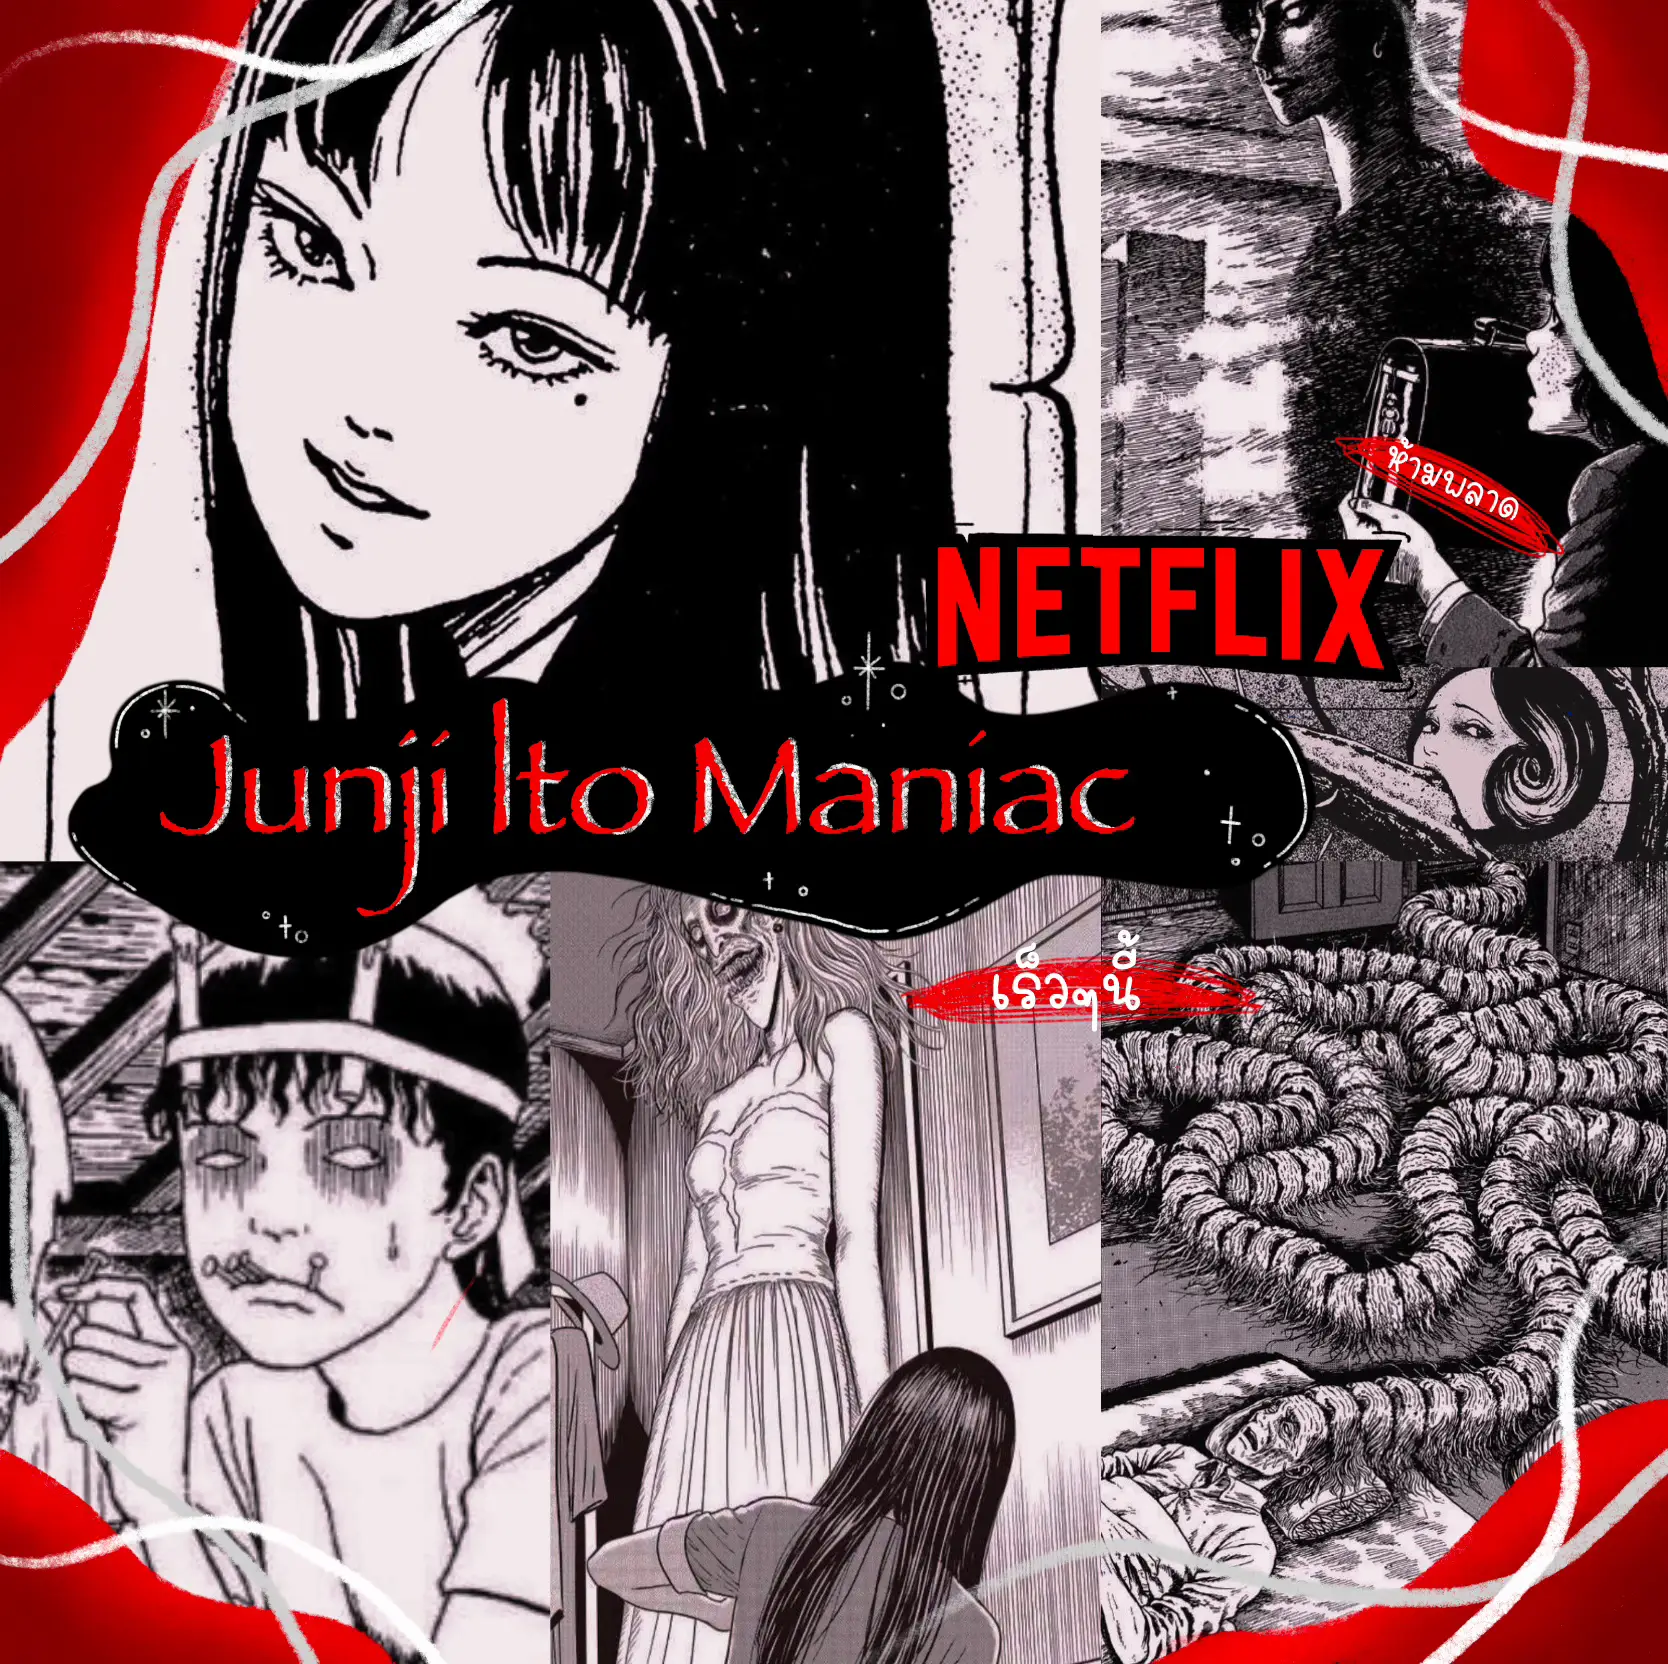 Netflix announces new Junji Ito anime series featuring 'Tomie' and